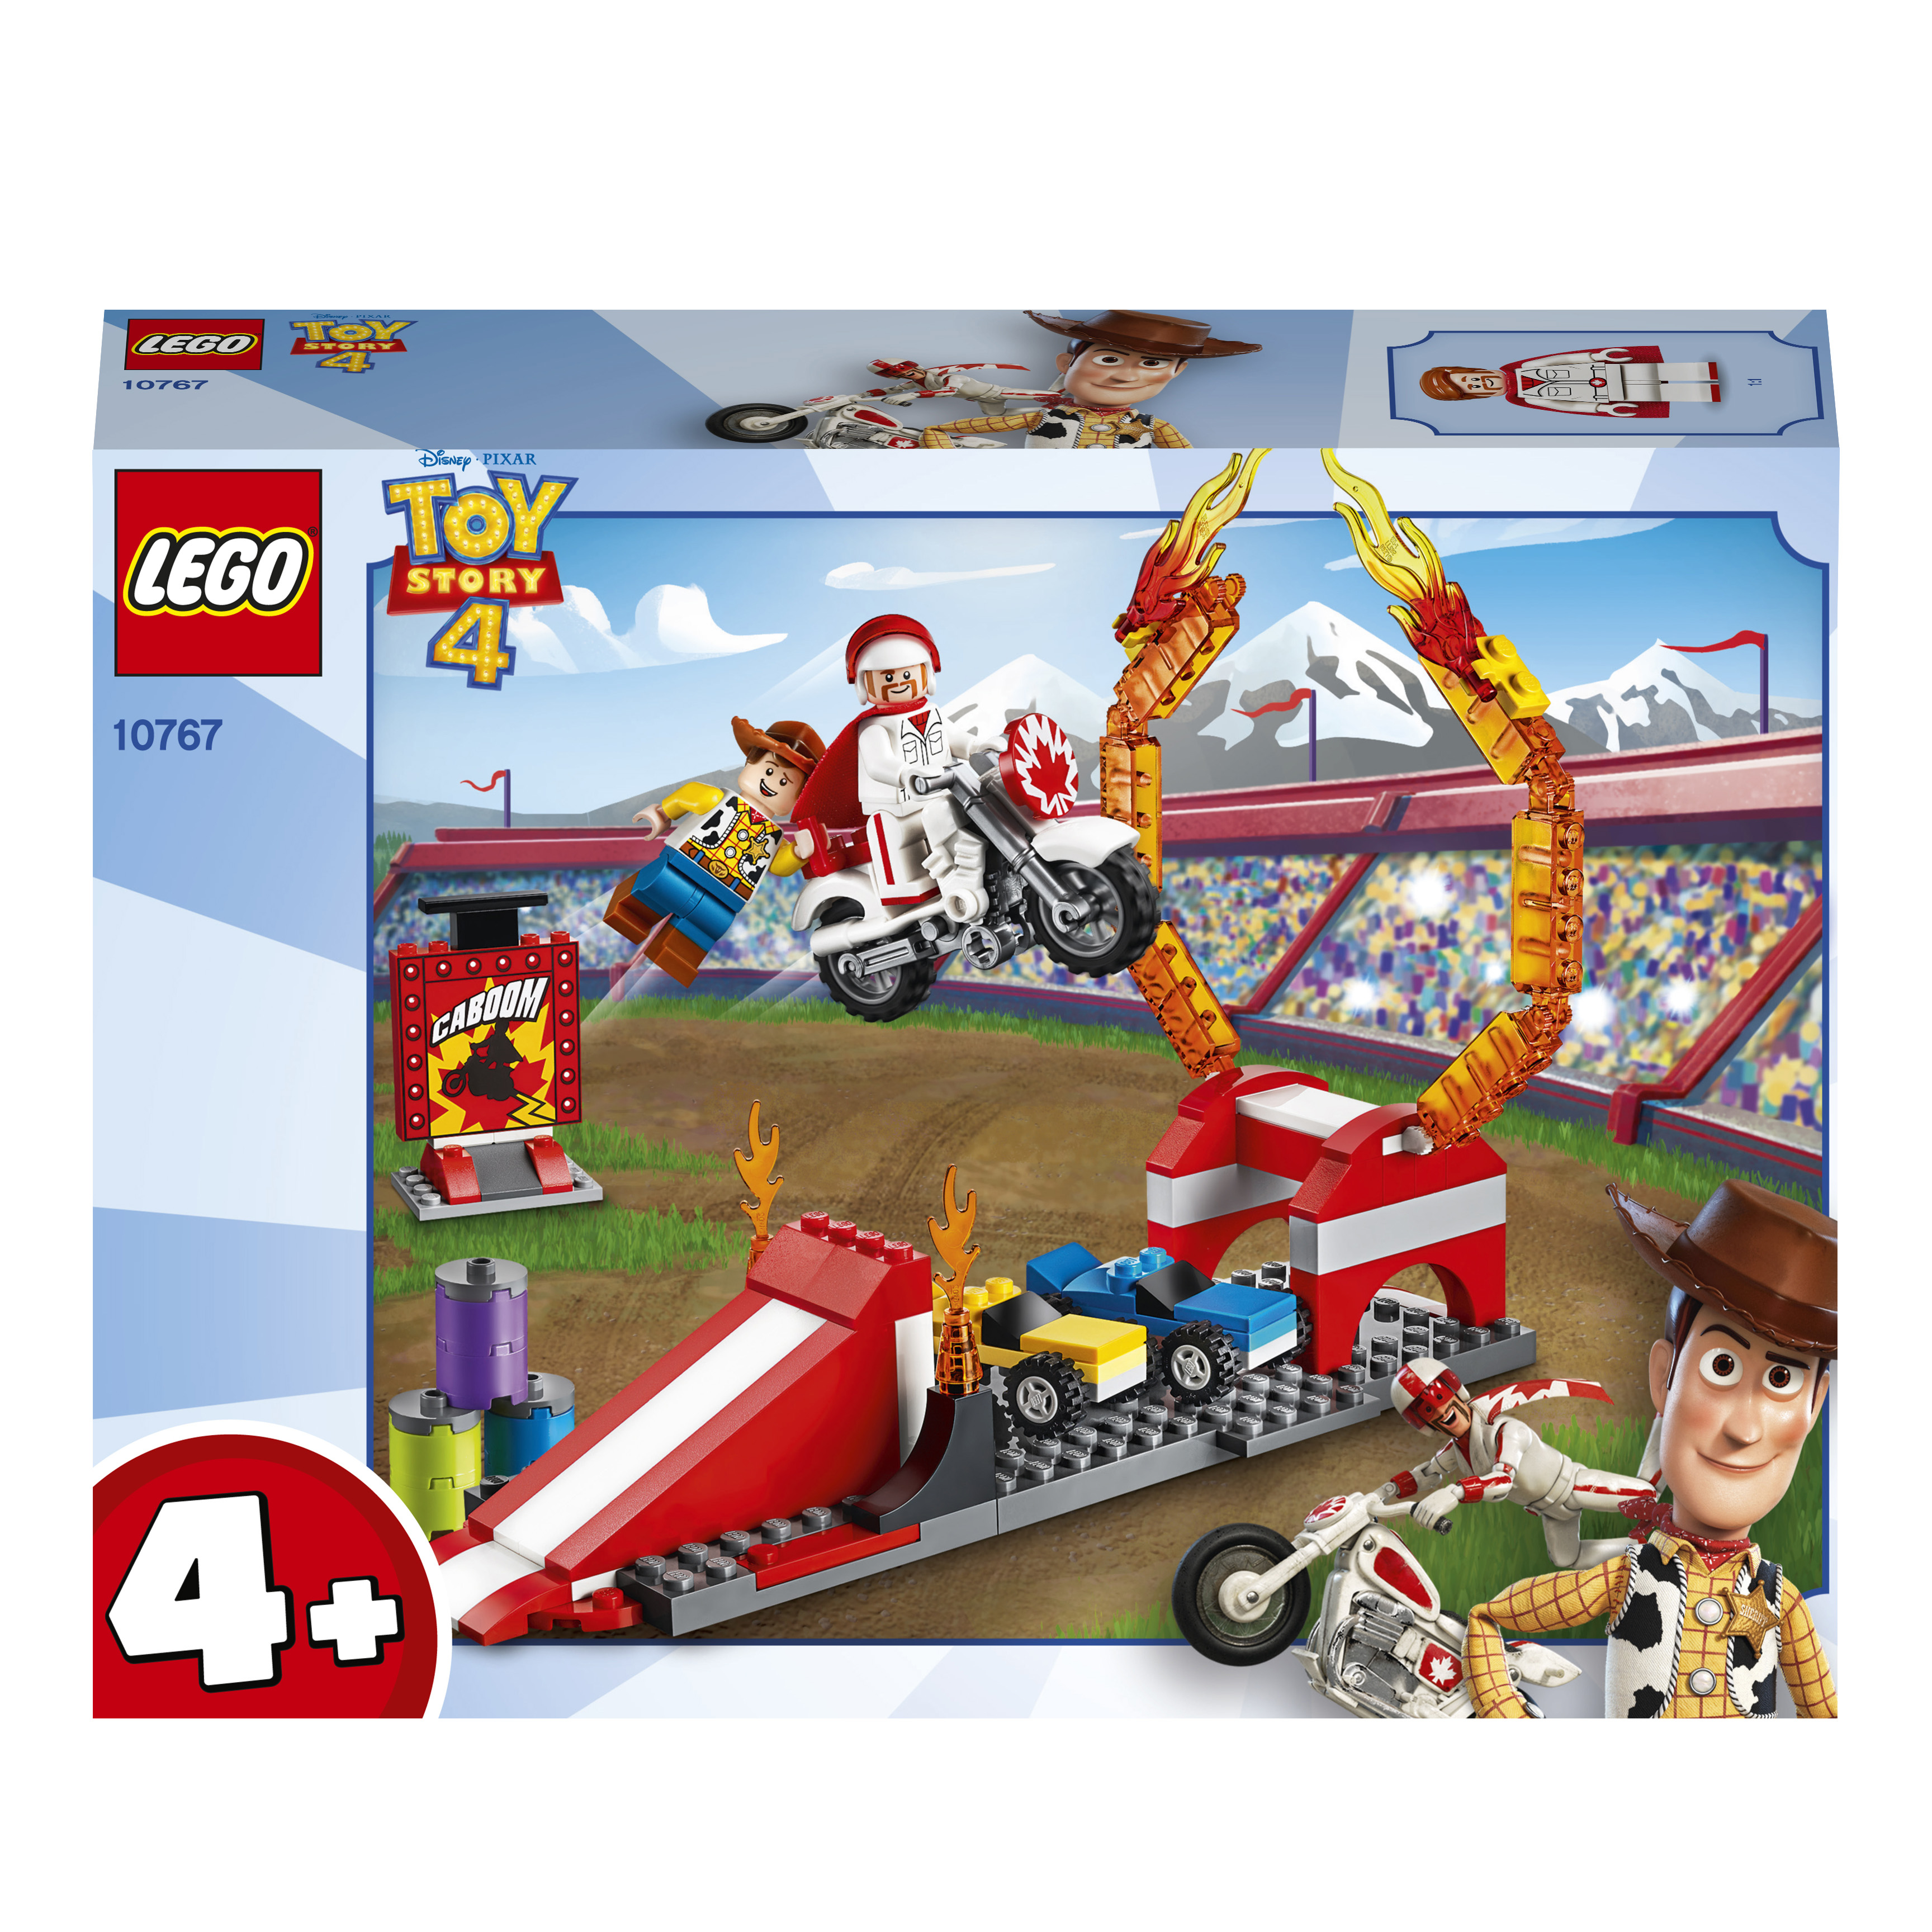 LEGO Toy Story 4 Duke Cabooms Stunt Show